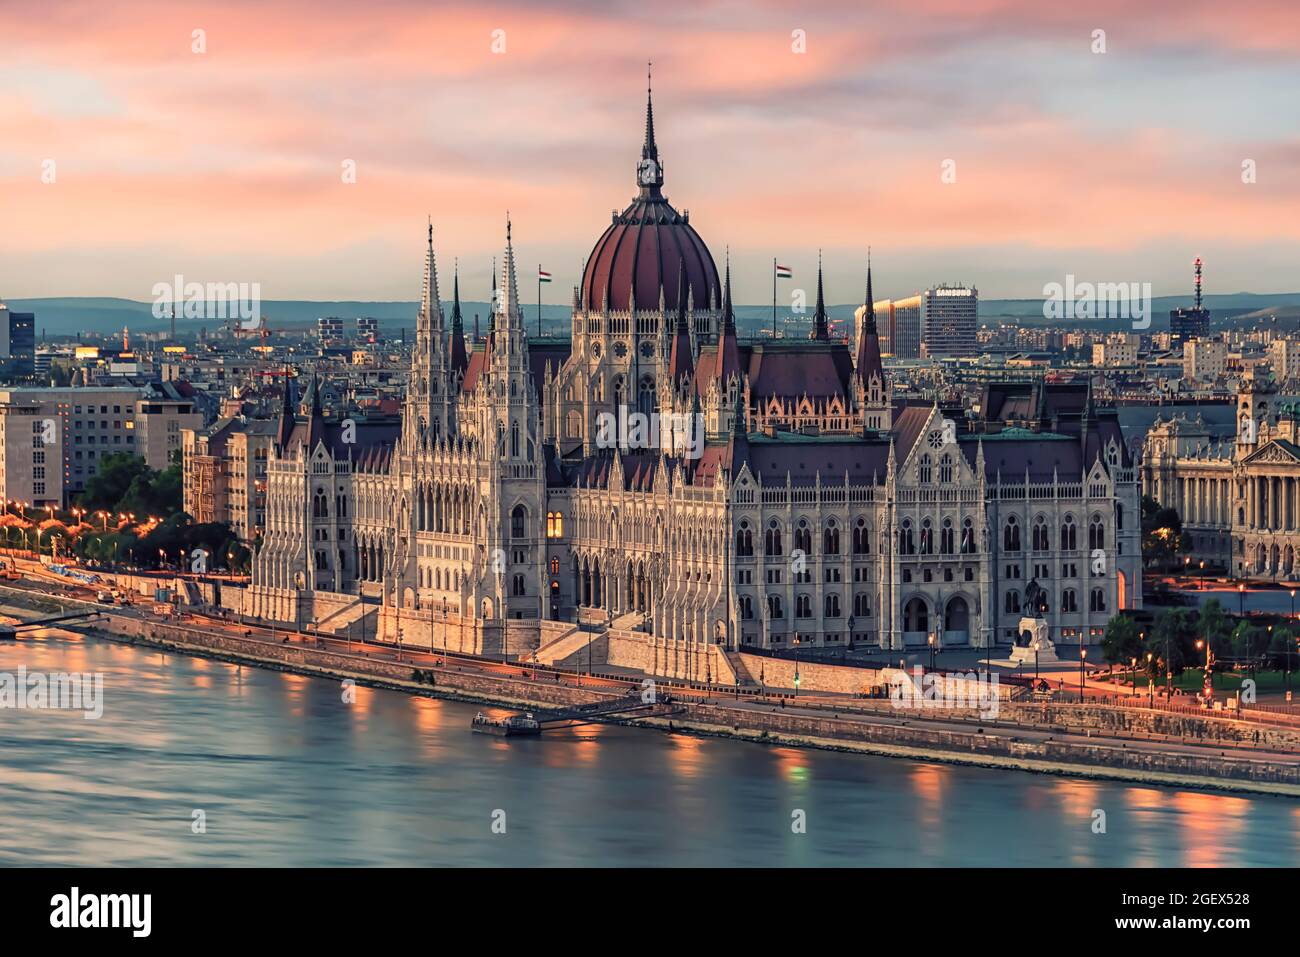 Hungarian Parliament Building in Budapest Stock Photo